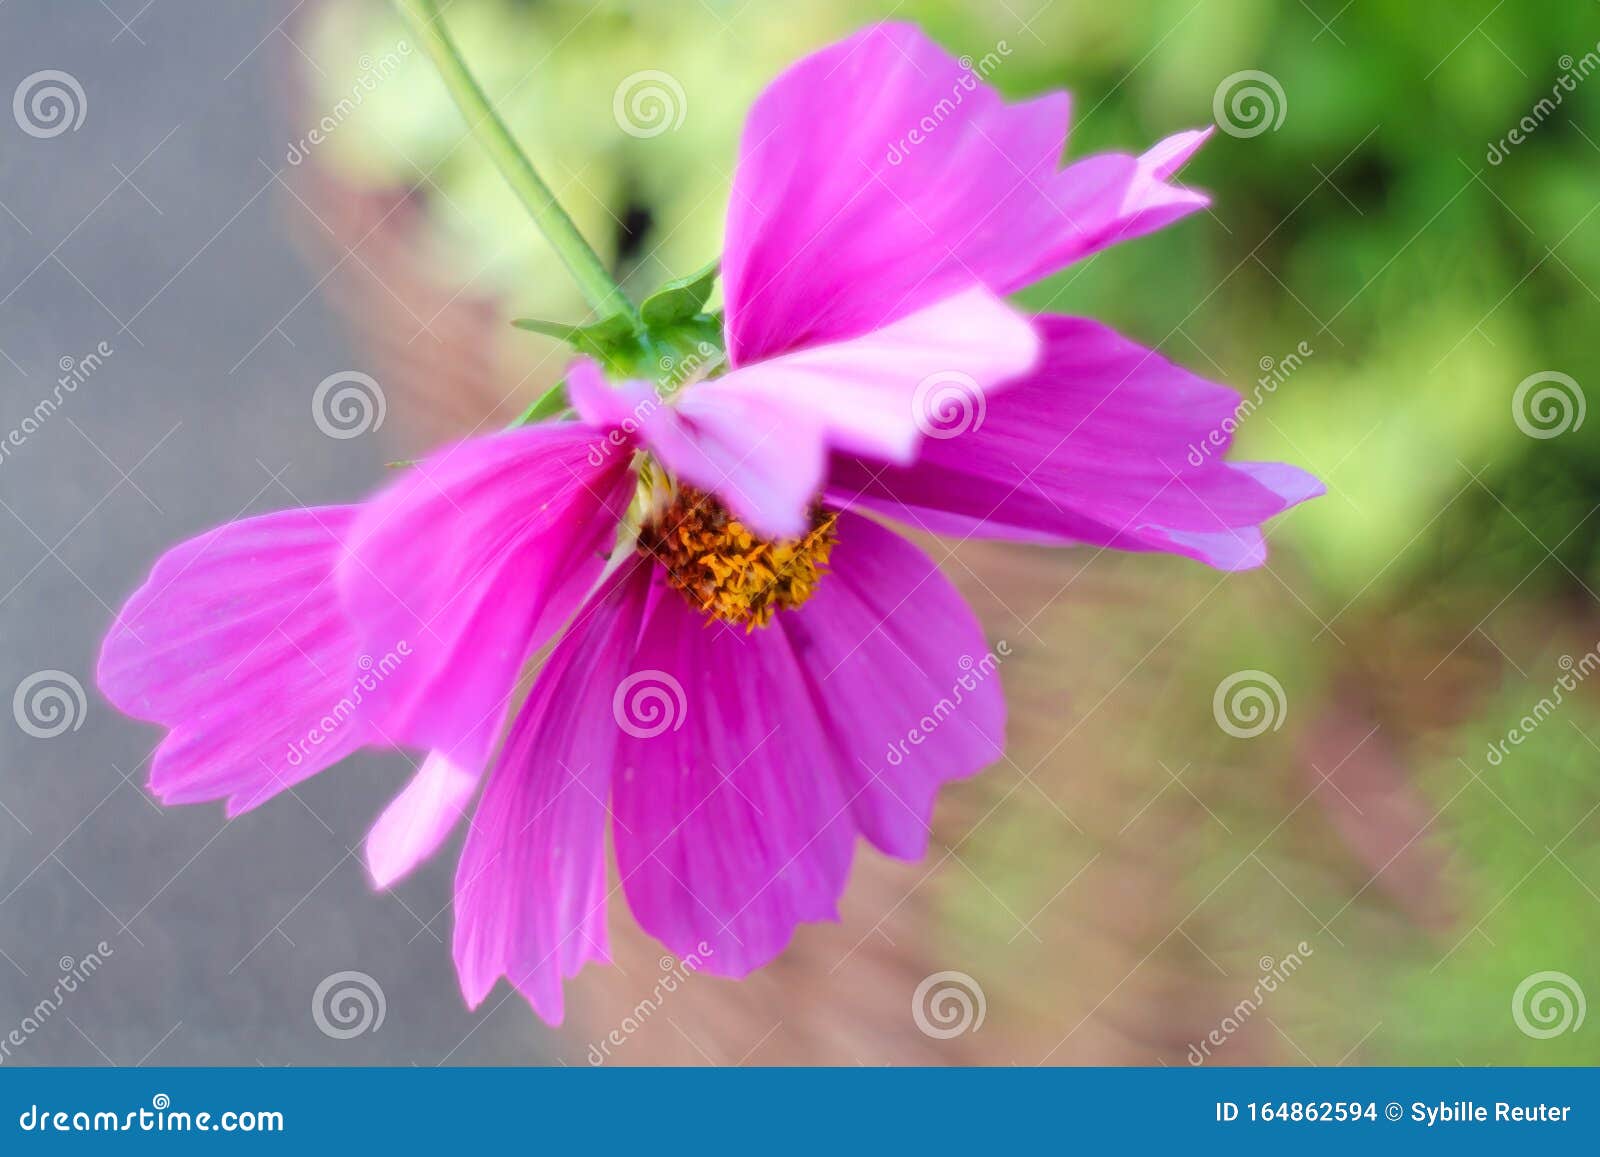 Pink Blossom Of Bidens Formosa Or Garden Aster Stock Photo Image